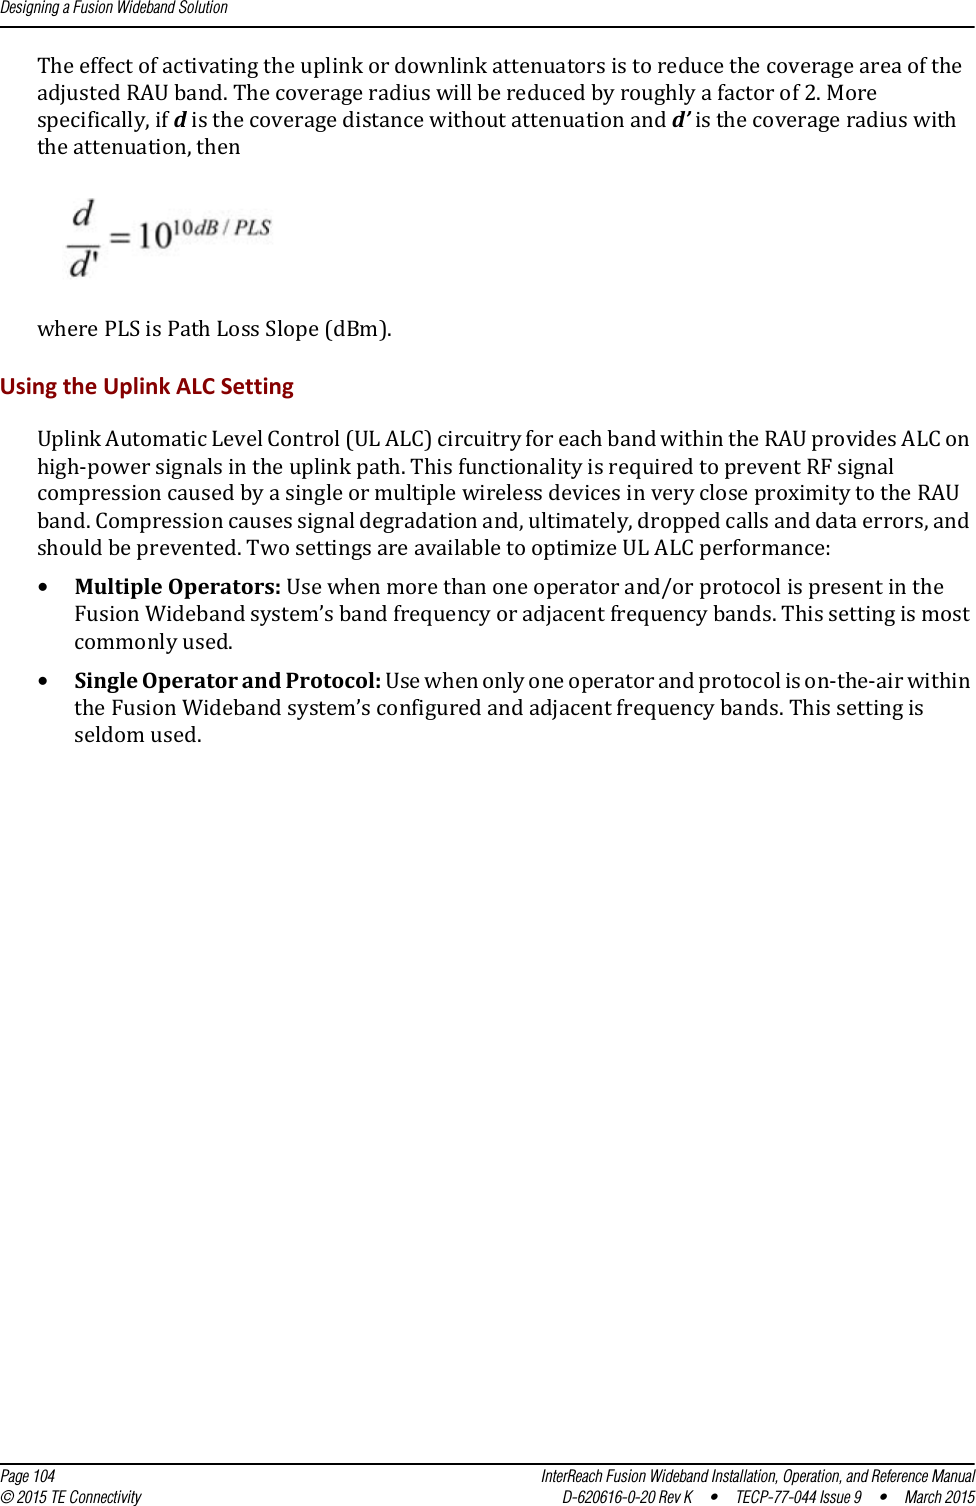 Designing a Fusion Wideband Solution  Page 104 InterReach Fusion Wideband Installation, Operation, and Reference Manual© 2015 TE Connectivity D-620616-0-20 Rev K  •  TECP-77-044 Issue 9  •  March 2015The effect of activating the uplink or downlink attenuators is to reduce the coverage area of the adjusted RAU band. The coverage radius will be reduced by roughly a factor of 2. More specifically, if d is the coverage distance without attenuation and d’ is the coverage radius with the attenuation, thenwhere PLS is Path Loss Slope (dBm).Using the Uplink ALC SettingUplink Automatic Level Control (UL ALC) circuitry for each band within the RAU provides ALC on high-power signals in the uplink path. This functionality is required to prevent RF signal compression caused by a single or multiple wireless devices in very close proximity to the RAU band. Compression causes signal degradation and, ultimately, dropped calls and data errors, and should be prevented. Two settings are available to optimize UL ALC performance:•Multiple Operators: Use when more than one operator and/or protocol is present in the Fusion Wideband system’s band frequency or adjacent frequency bands. This setting is most commonly used.•Single Operator and Protocol: Use when only one operator and protocol is on-the-air within the Fusion Wideband system’s configured and adjacent frequency bands. This setting is seldom used.